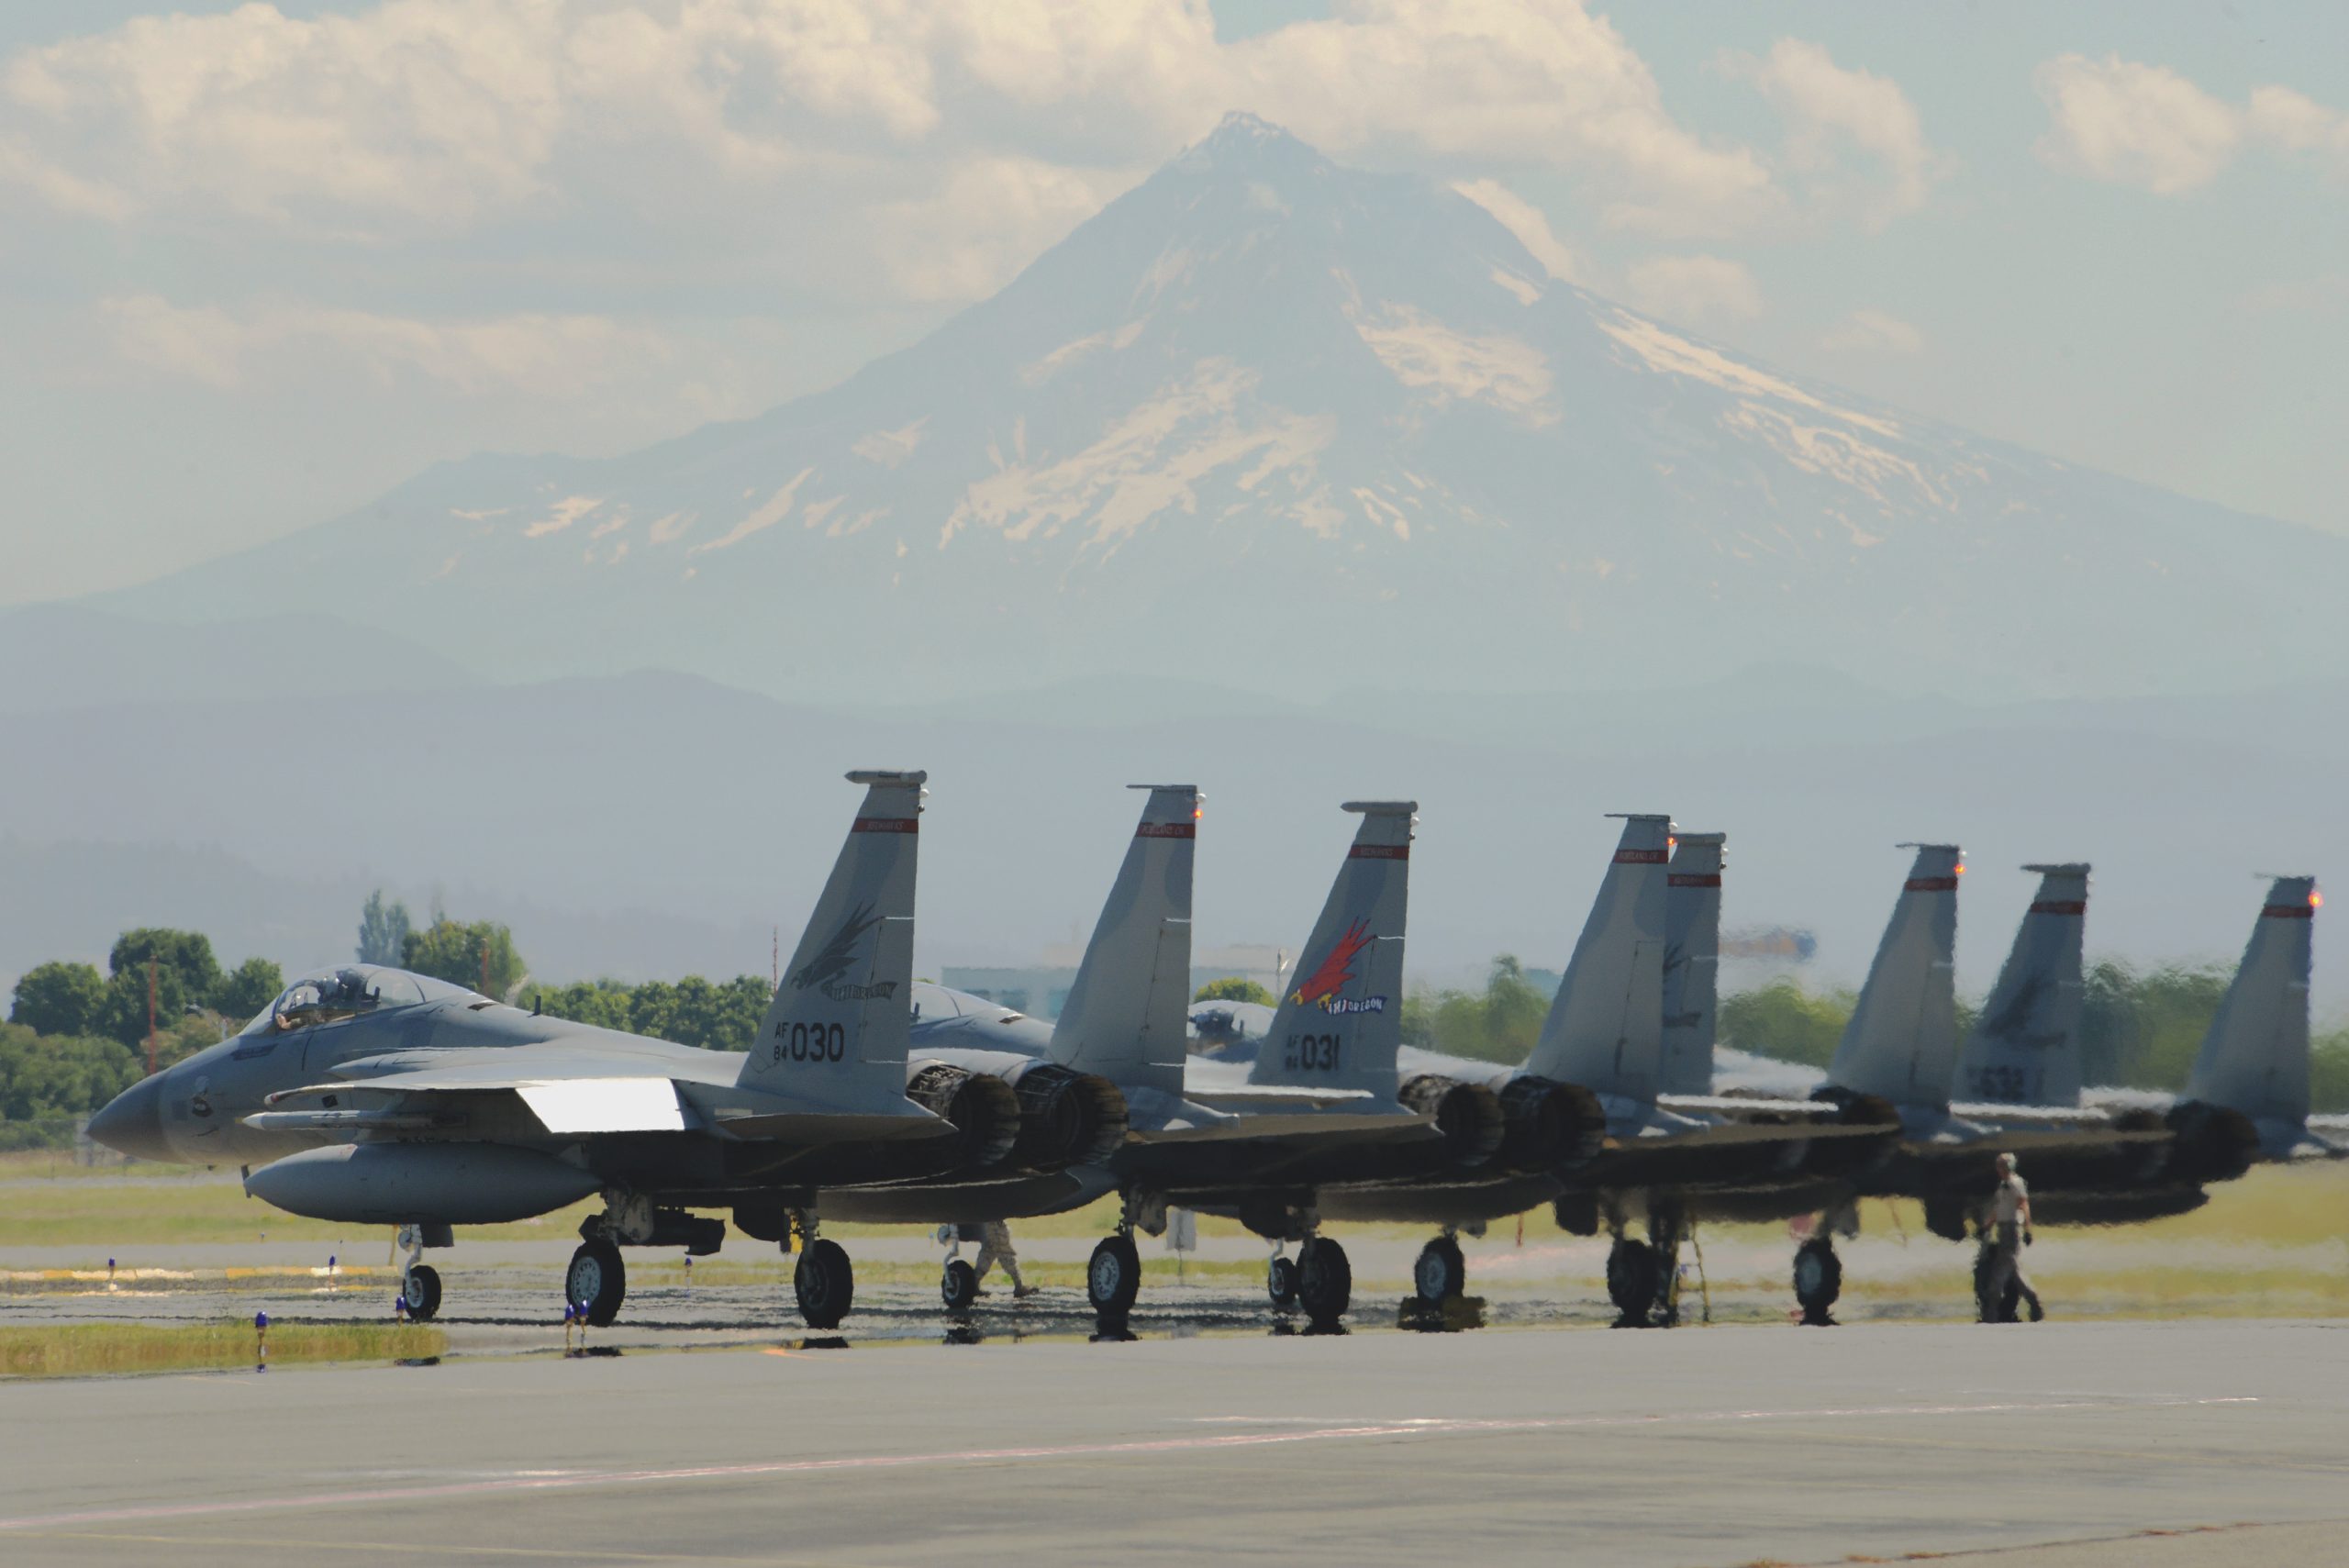 142ND WING TO CONDUCT TEMPORARY NIGHT FLYING OPERATIONS AUG. 25-27 – Tillamook County Pioneer